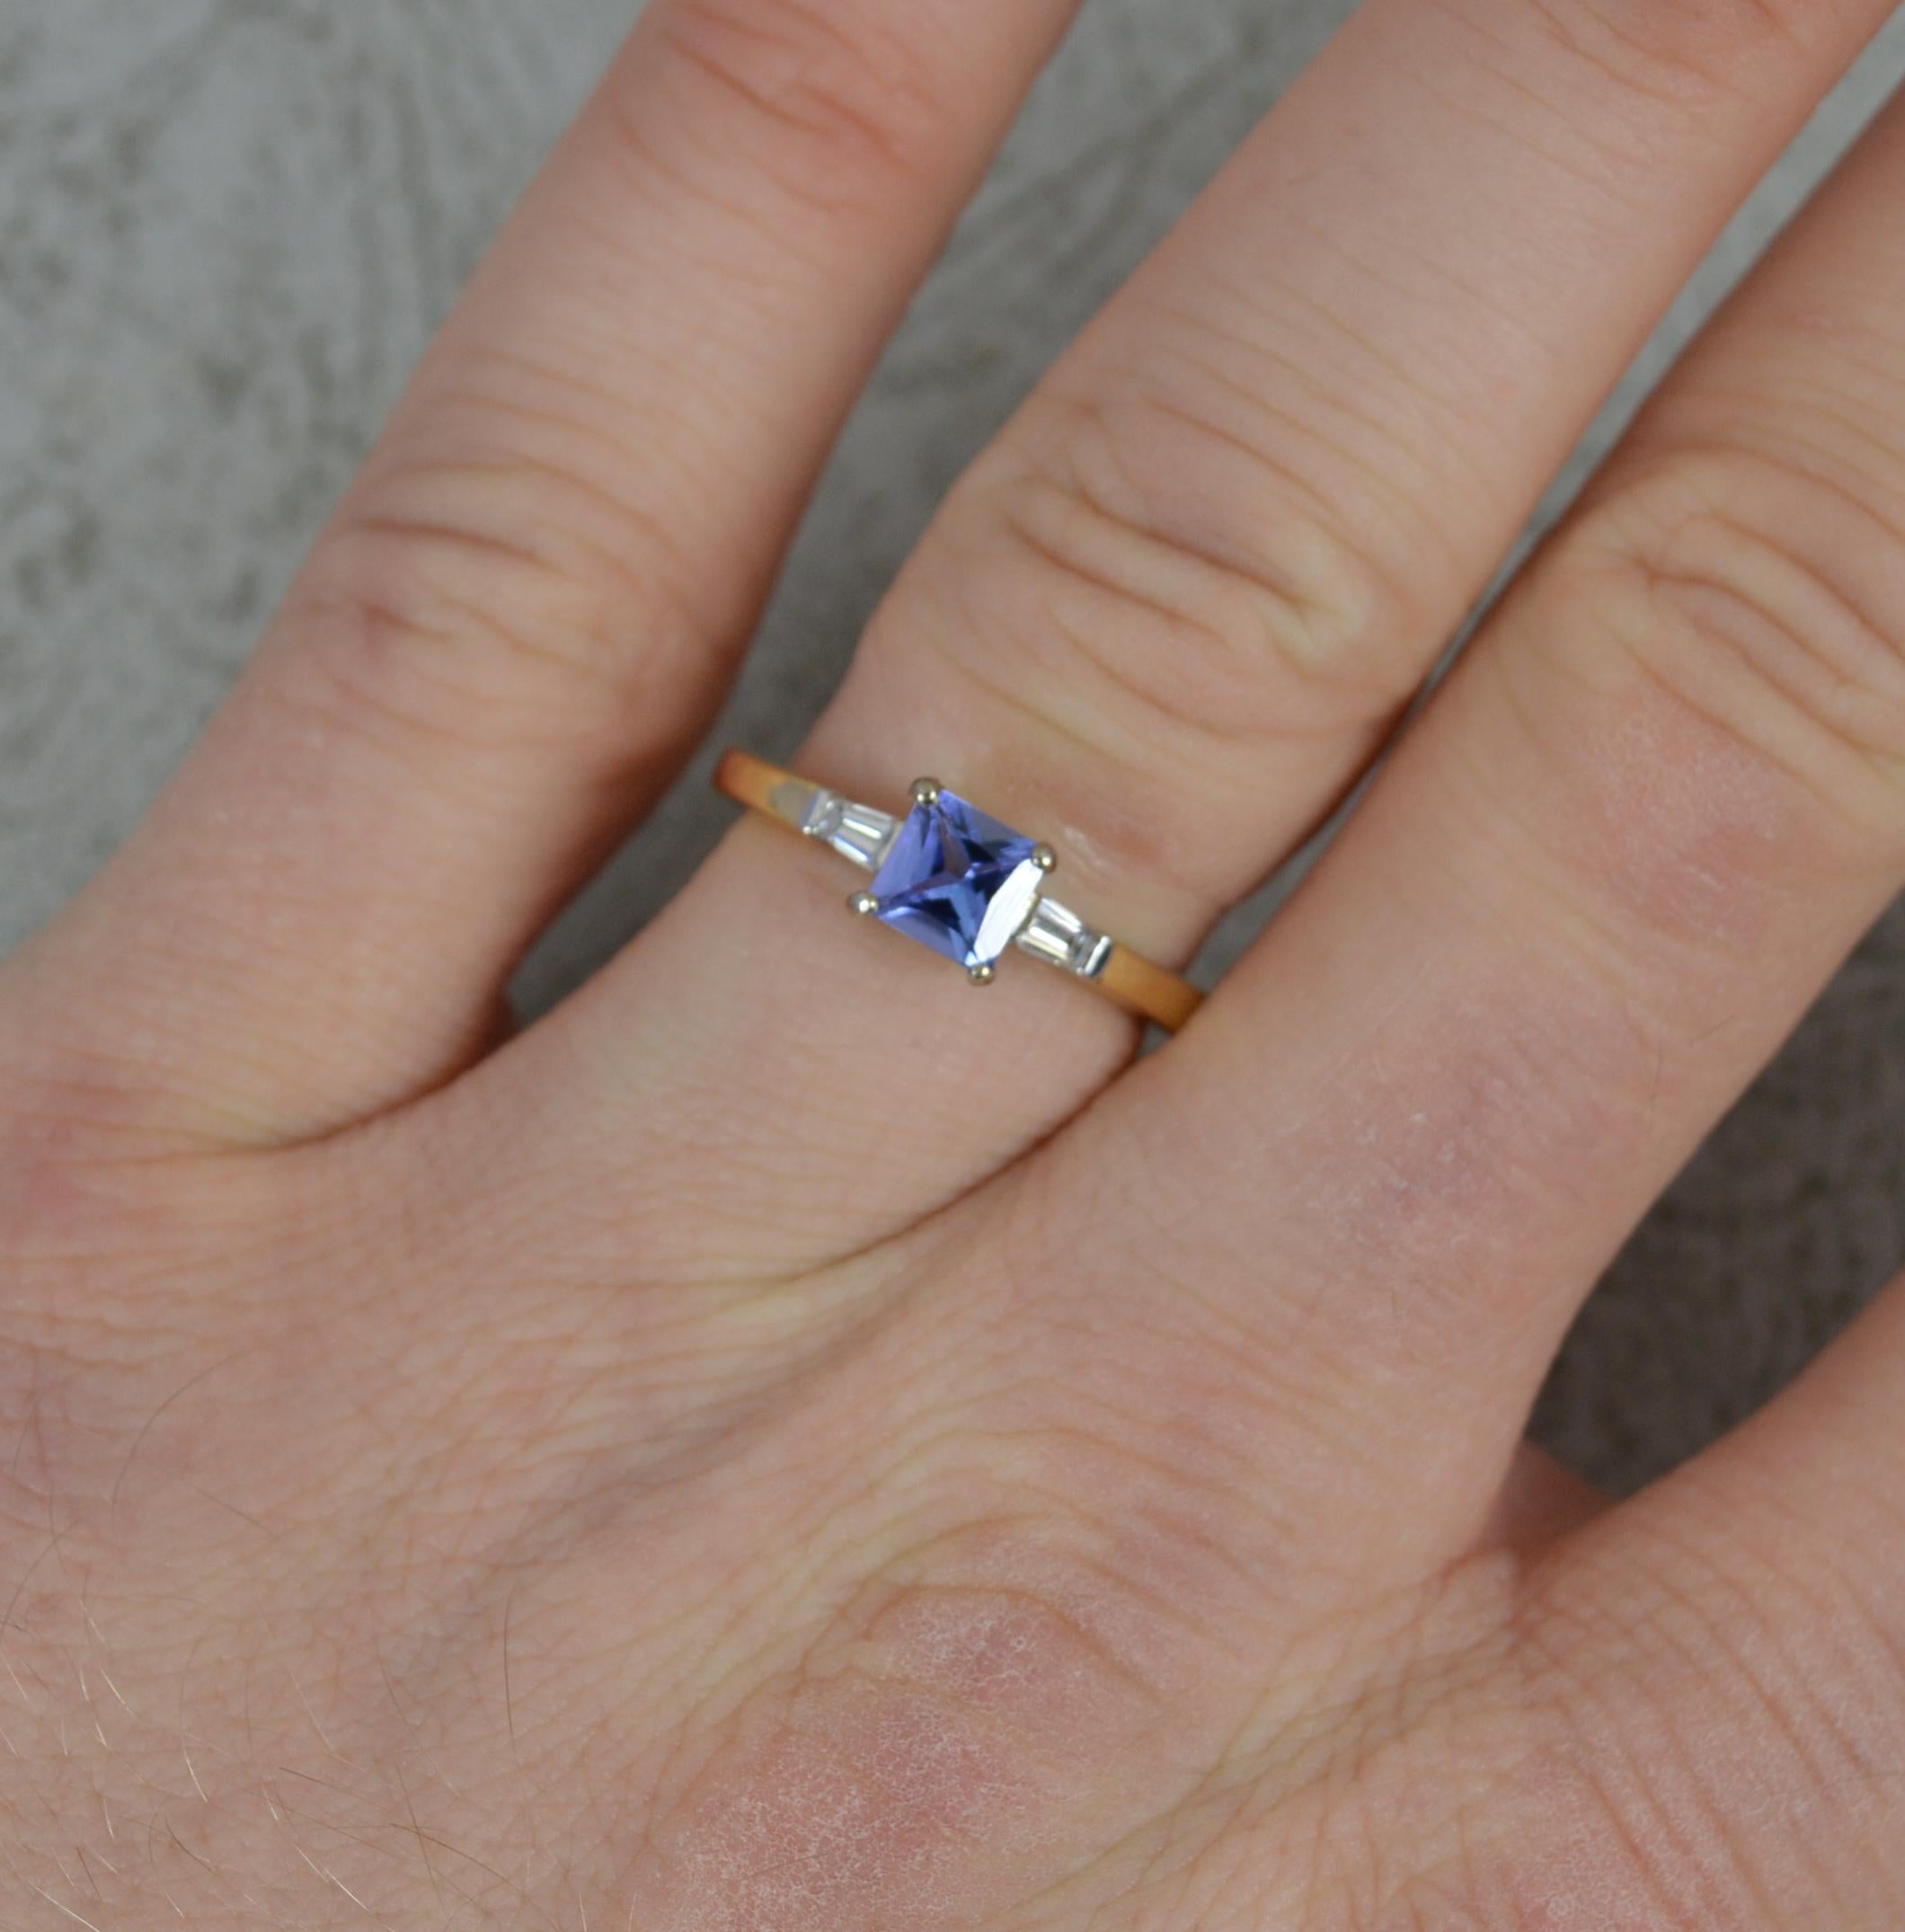 A stunning Tanzanite and Diamond ring.
​Solid 18 carat yellow gold shank and white gold head setting.
Designed with a princess cut tanzanite to centre. 5mm diameter. To each side are tapered baguette cut diamonds to each side.
11mm spread of stones.